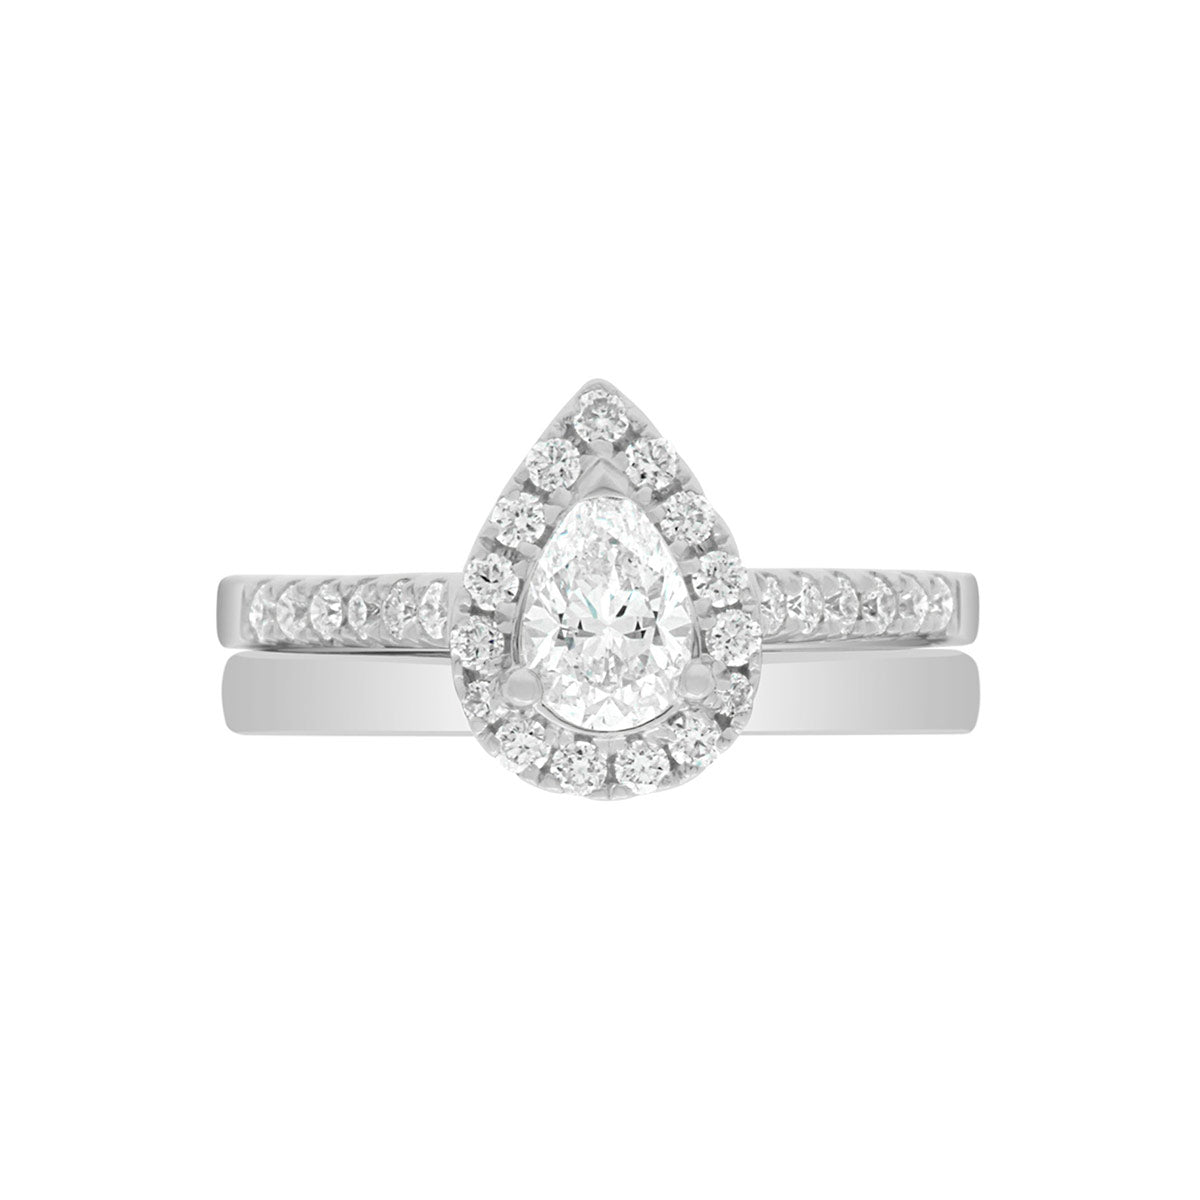 Pear Cut Halo Ring in platinum, laying flat with a matching platinum wedding band,on A WHITE SURFACE WITH A WHITE BACKGROUND